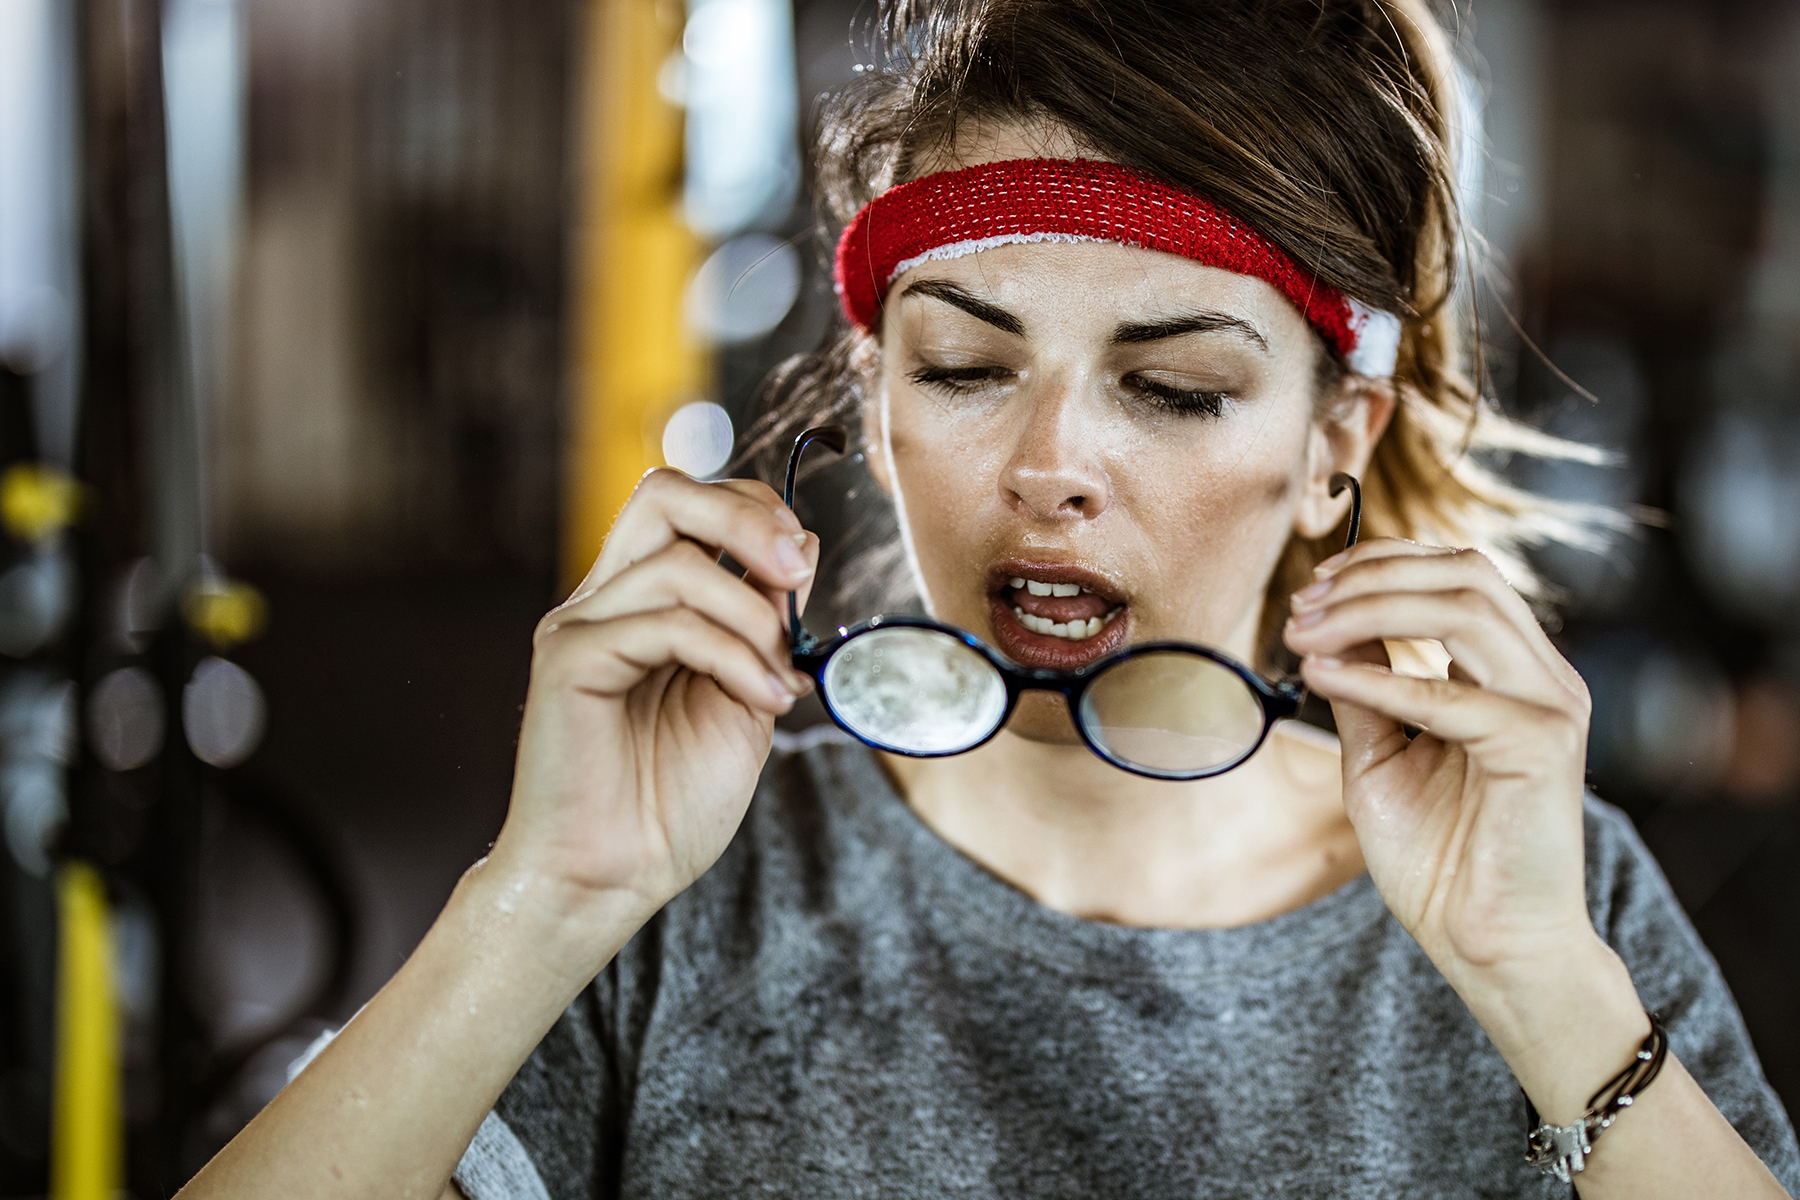 Sweaty female athlete cleaning her eyeglasses from condensation.